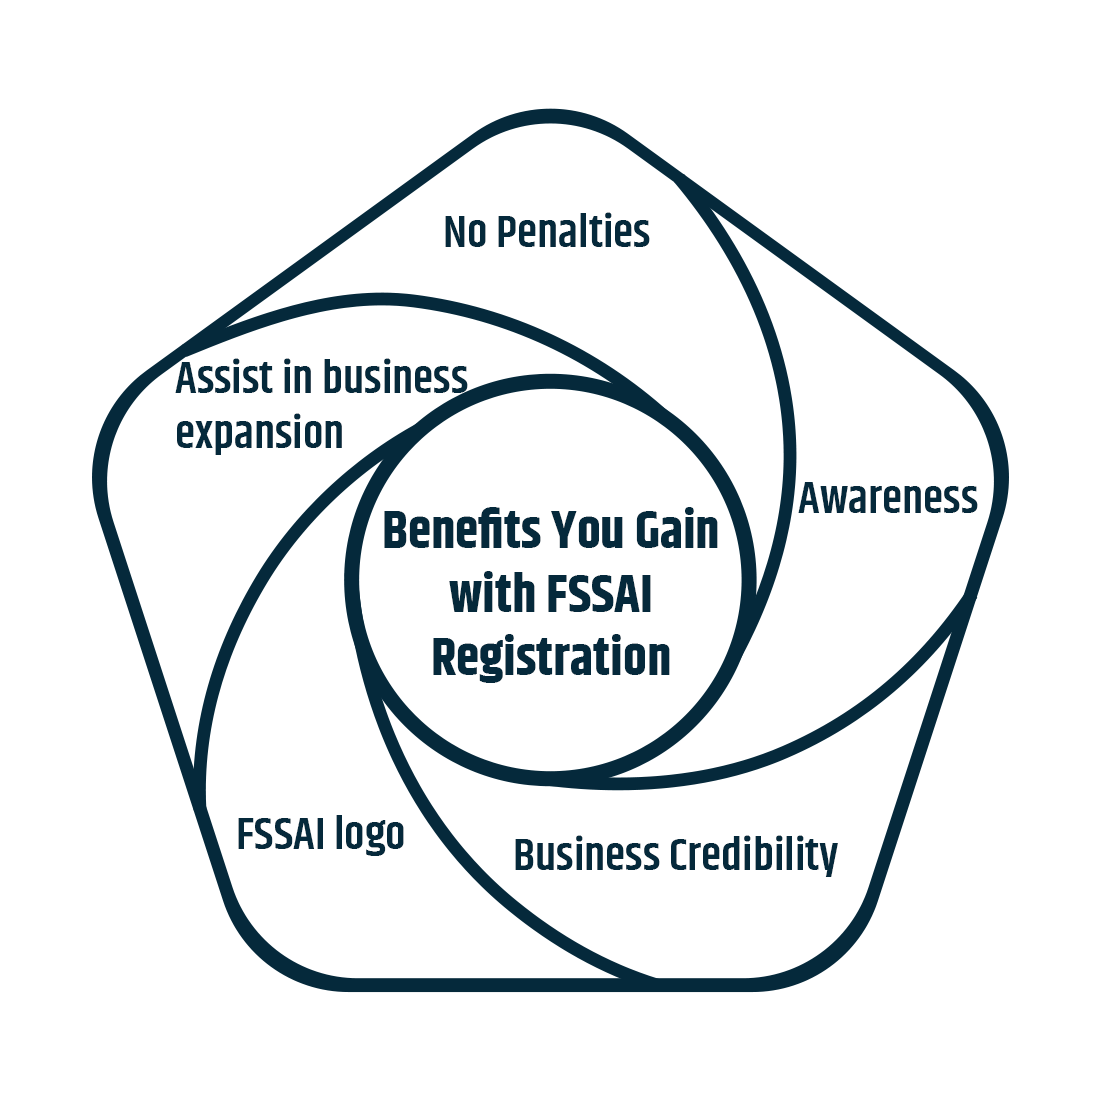 These are the benefits you gain with fssai registration